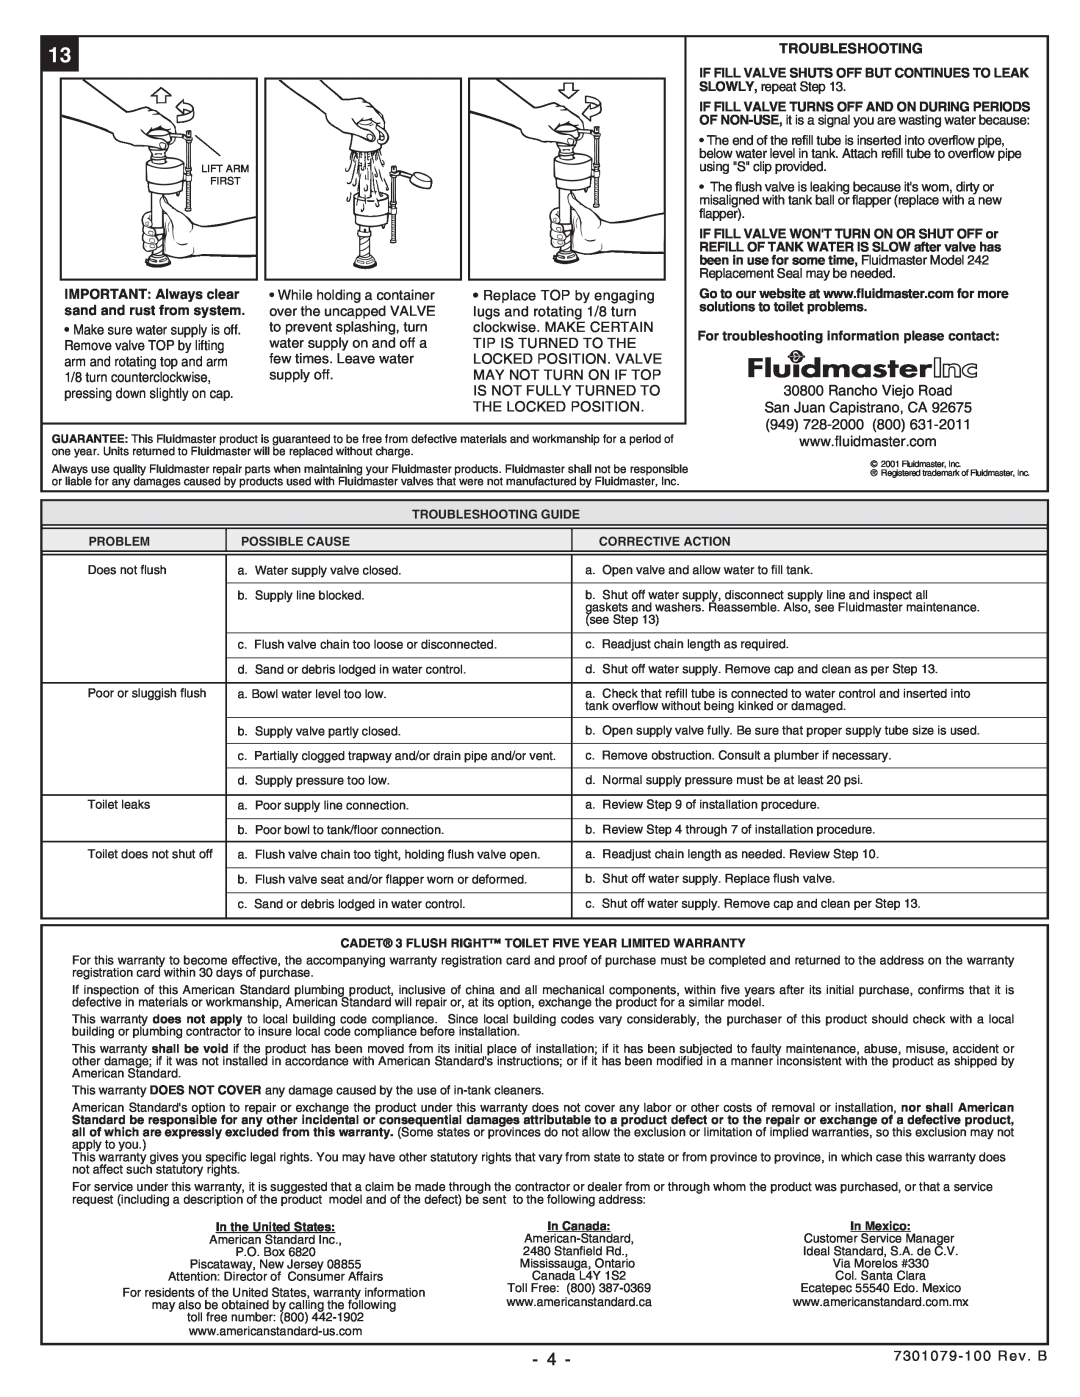 American Standard 3305 installation instructions Troubleshooting 